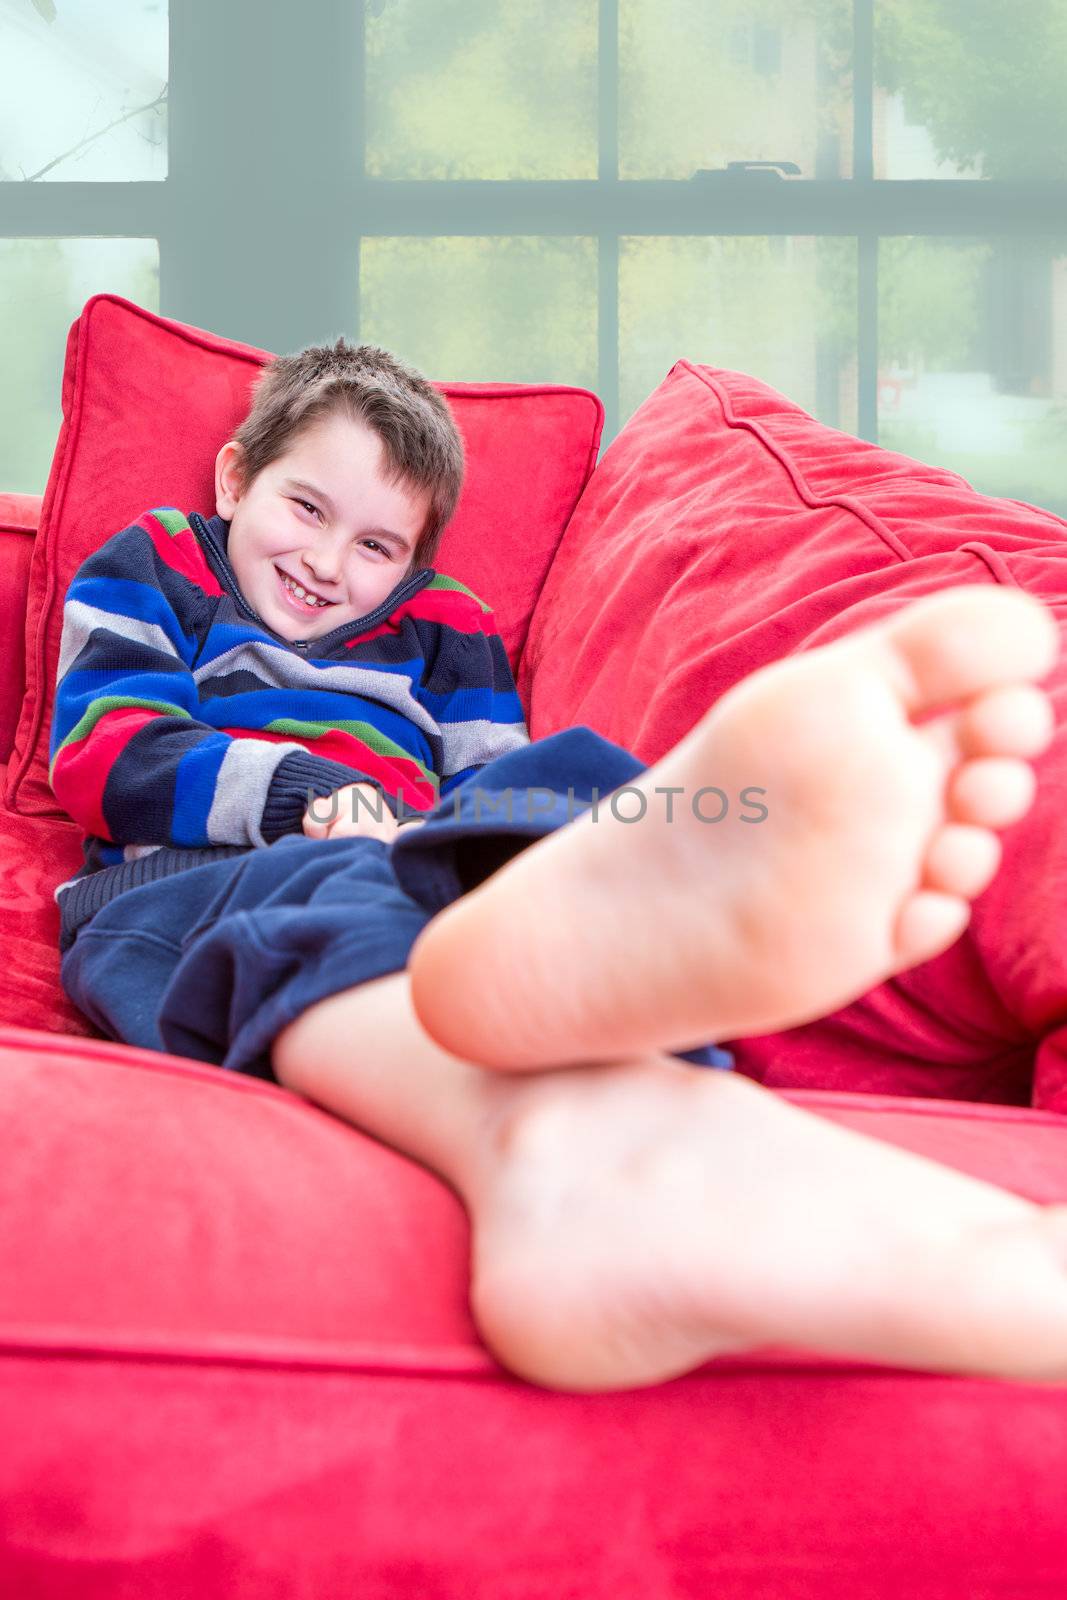 Eight years old kid promoting a feeling of positive on the red couch